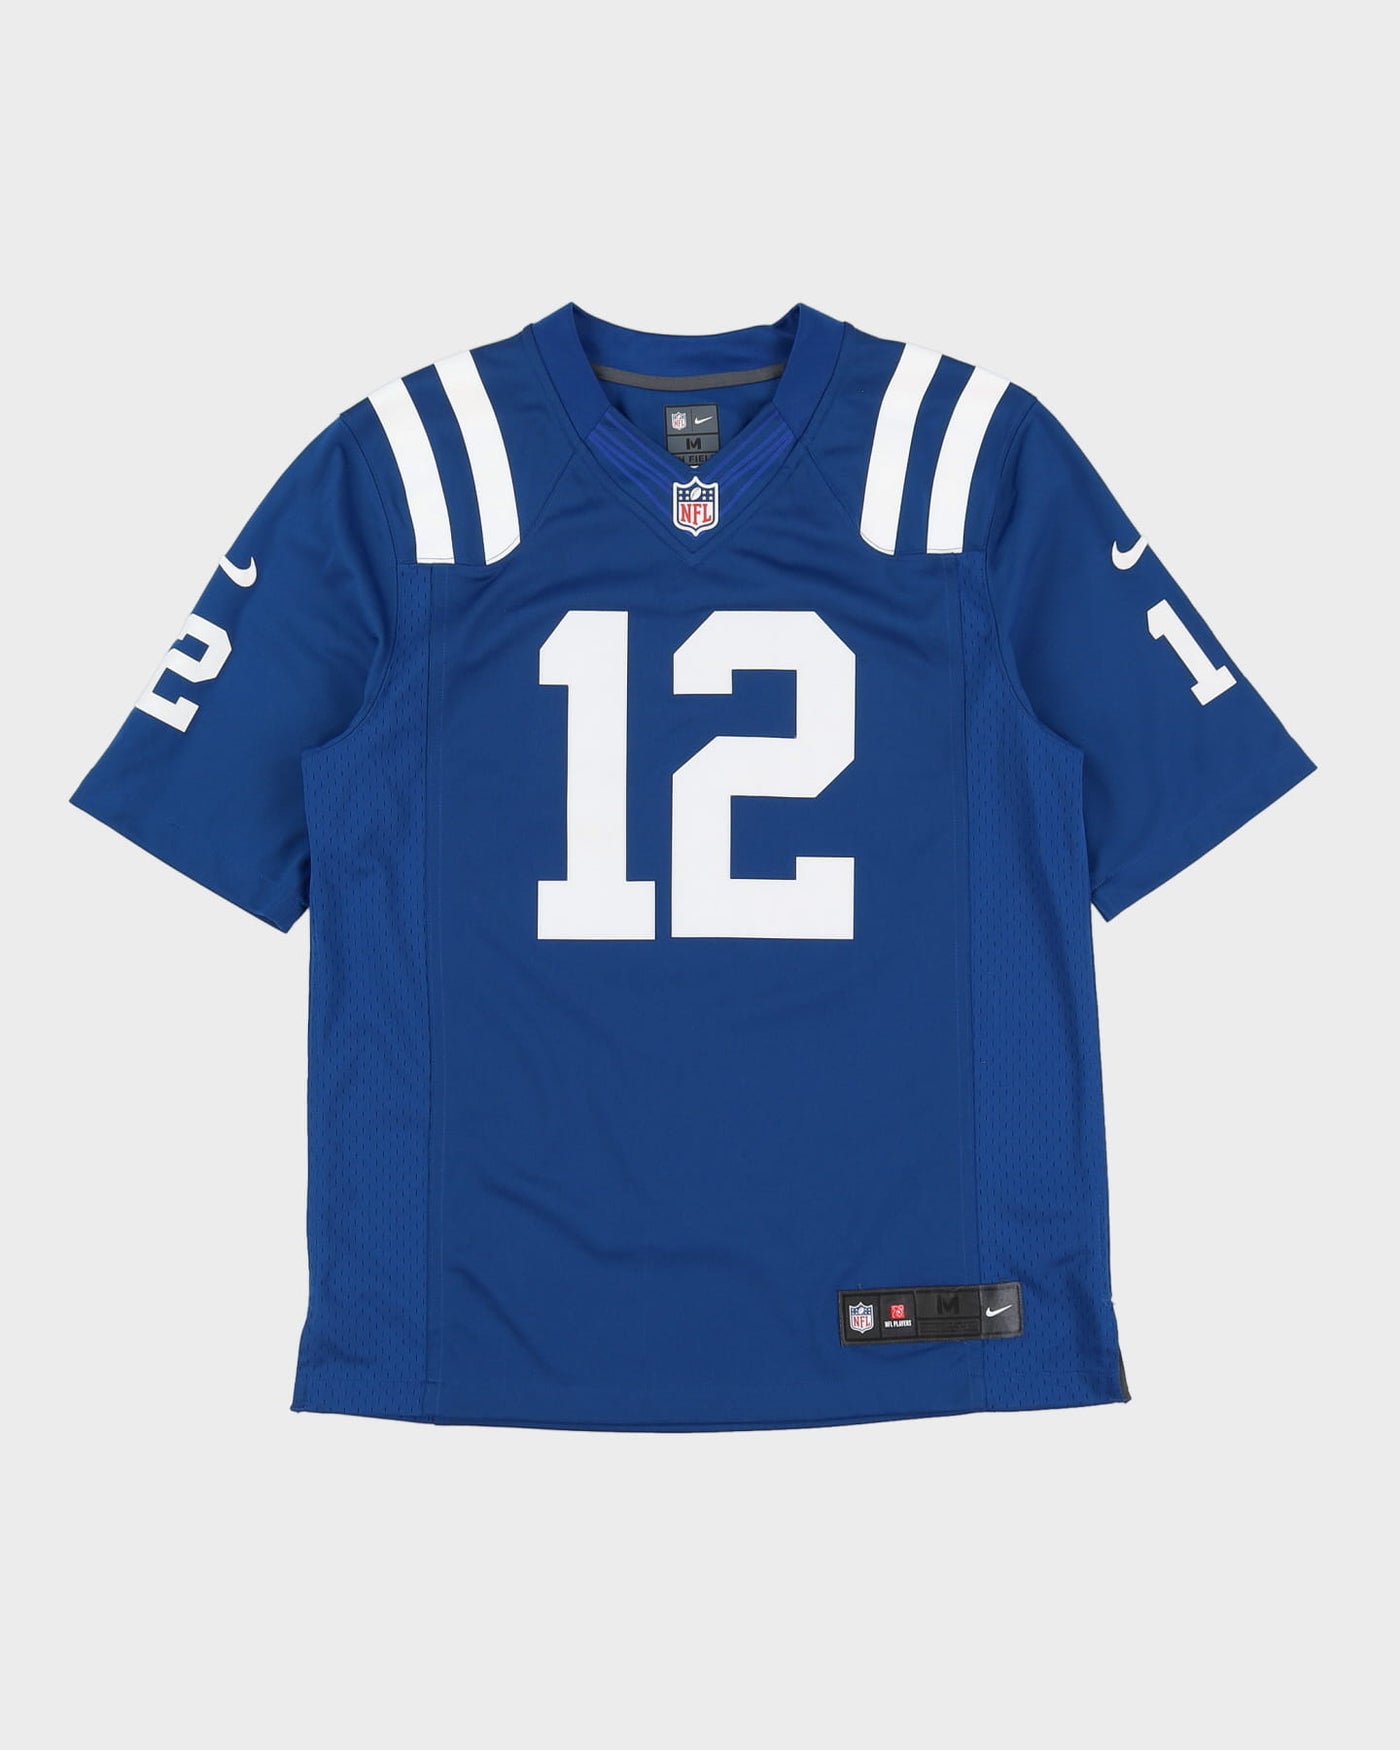 Andrew Luck #12 Indianapolis Colts Stitched NFL Jersey - M